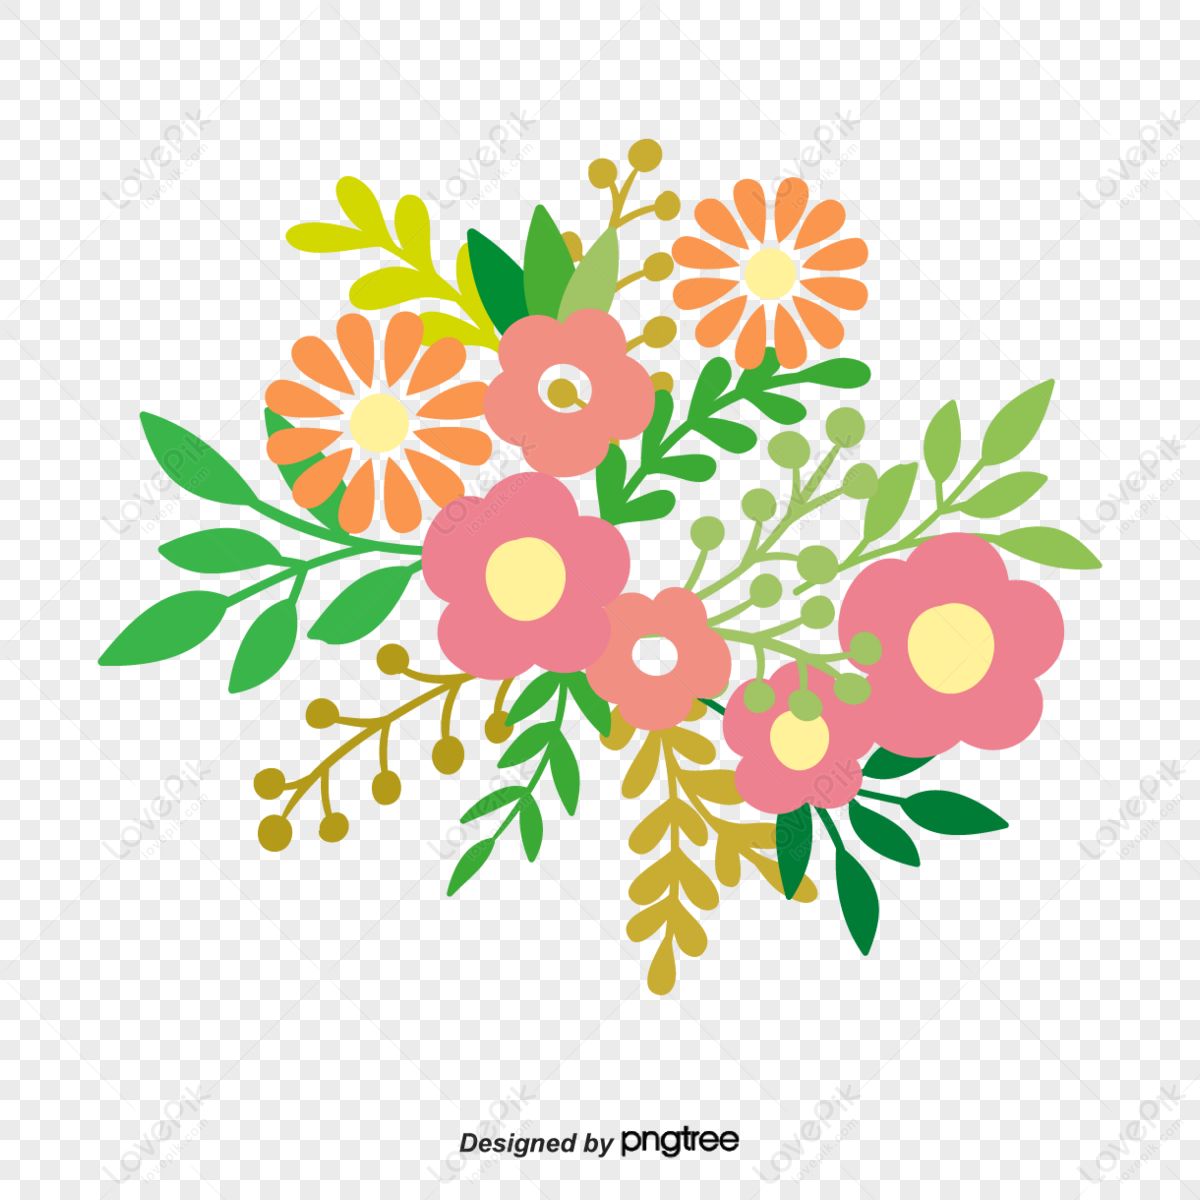 Floral Pattern PNG Images For Free Download - Pngtree